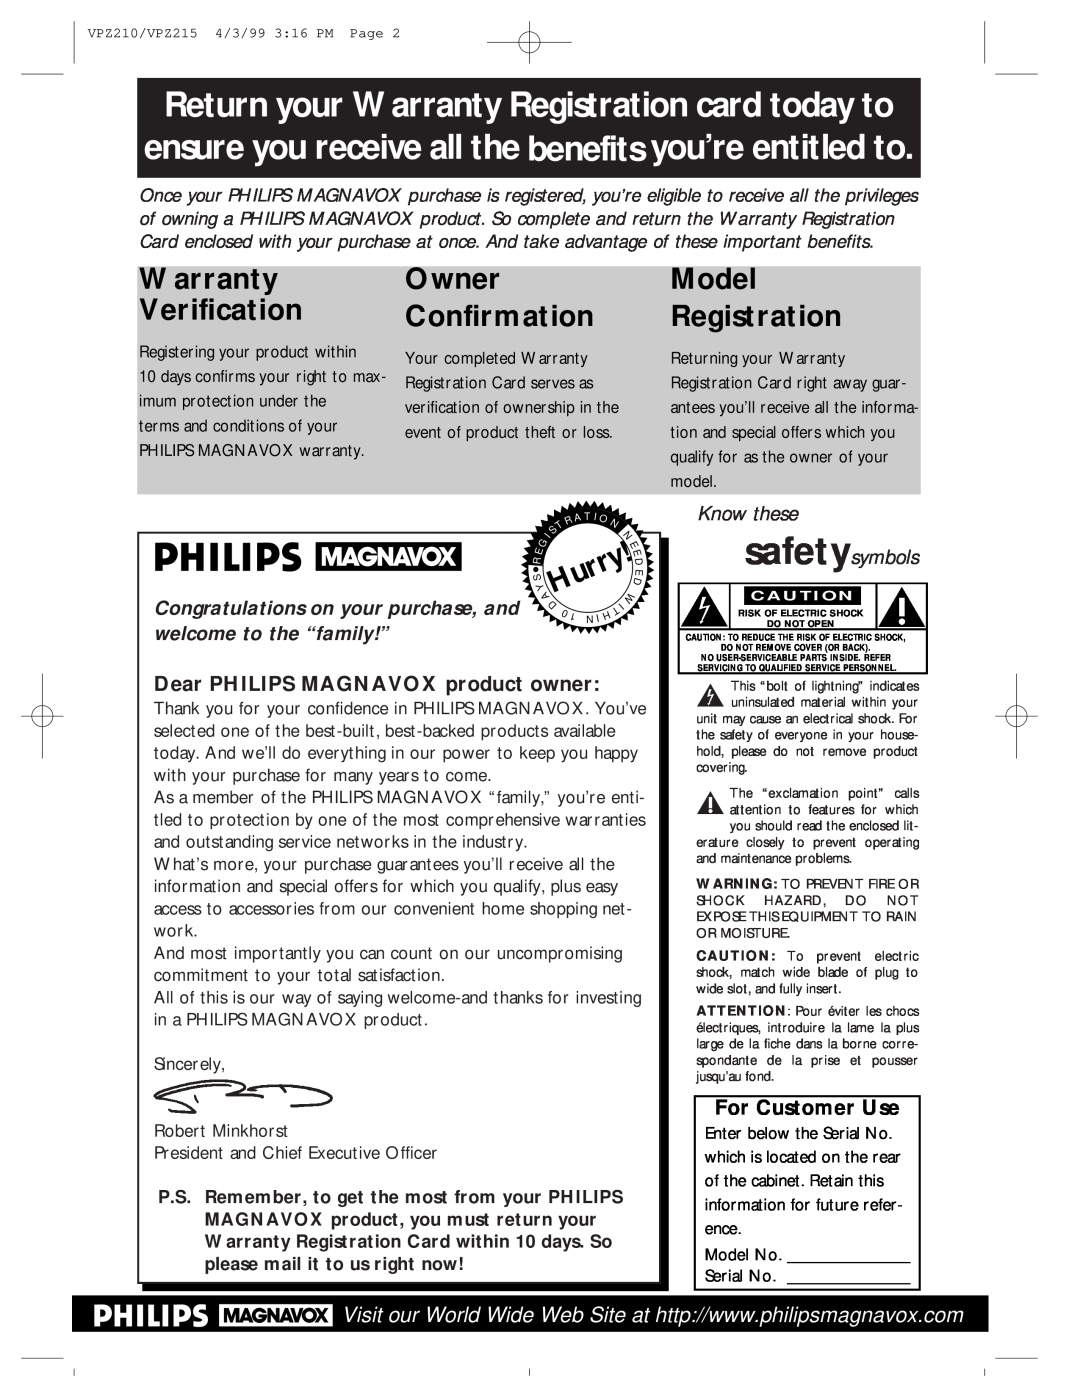 Philips VPZ215AT, VPZ210AT Warranty Verification, Owner Confirmation, Model Registration, AHurry, Know these safetysymbols 